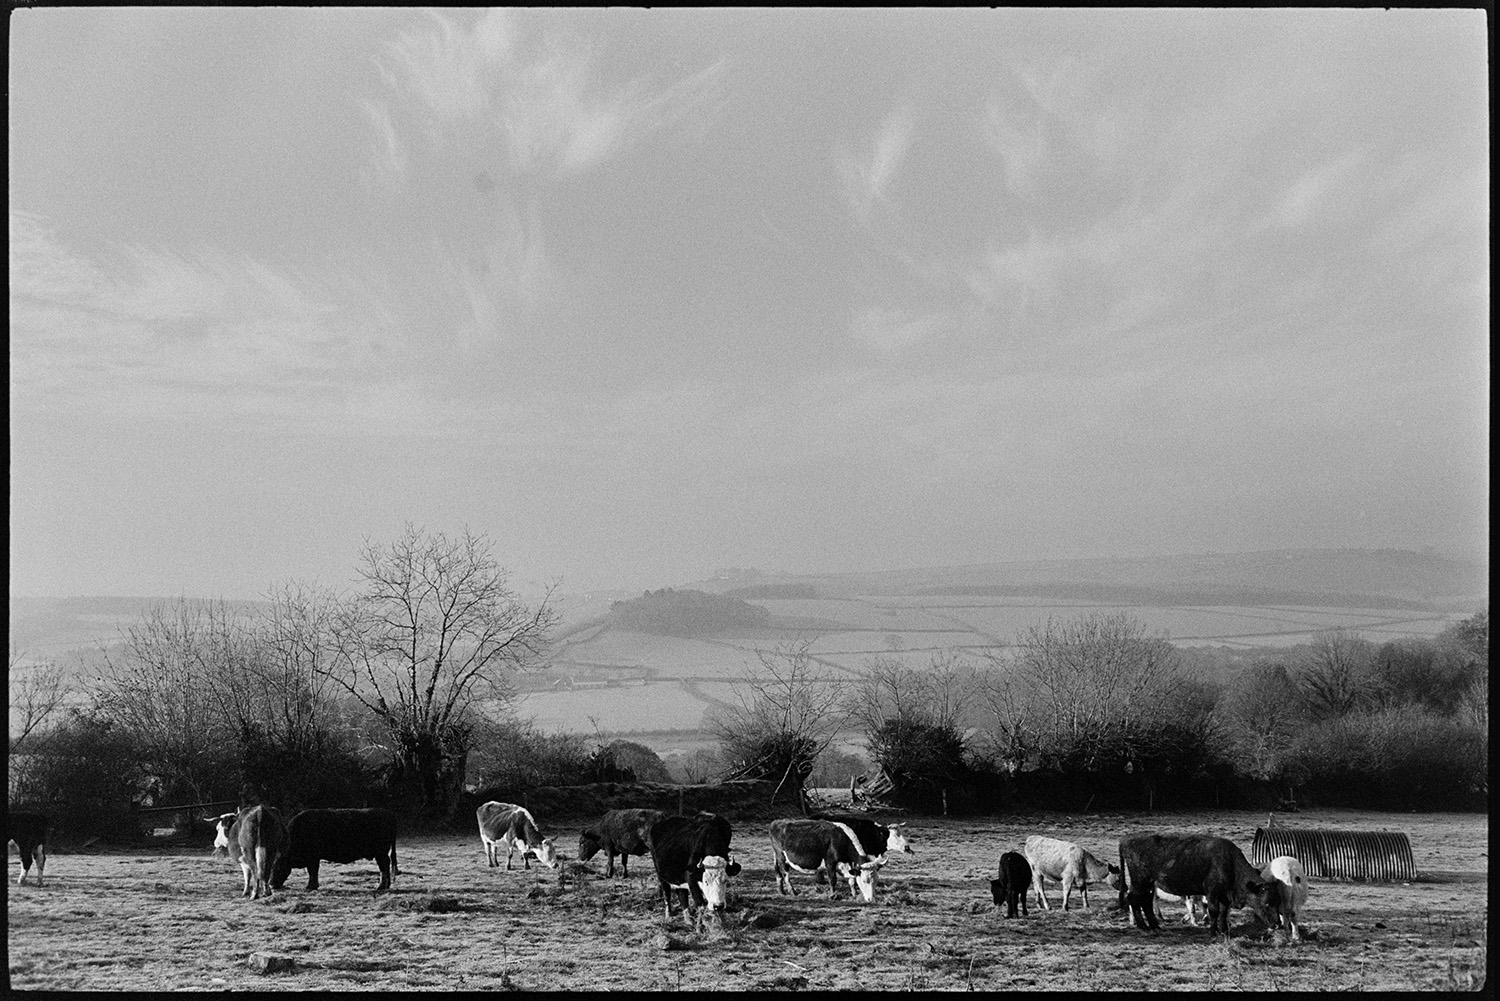 Frosty landscape with cattle early light, clouds. 
[Cattle grazing in a frosty field in Dolton in the early morning. A misty landscape of fields, trees and hedgerows can be seen in the background.]